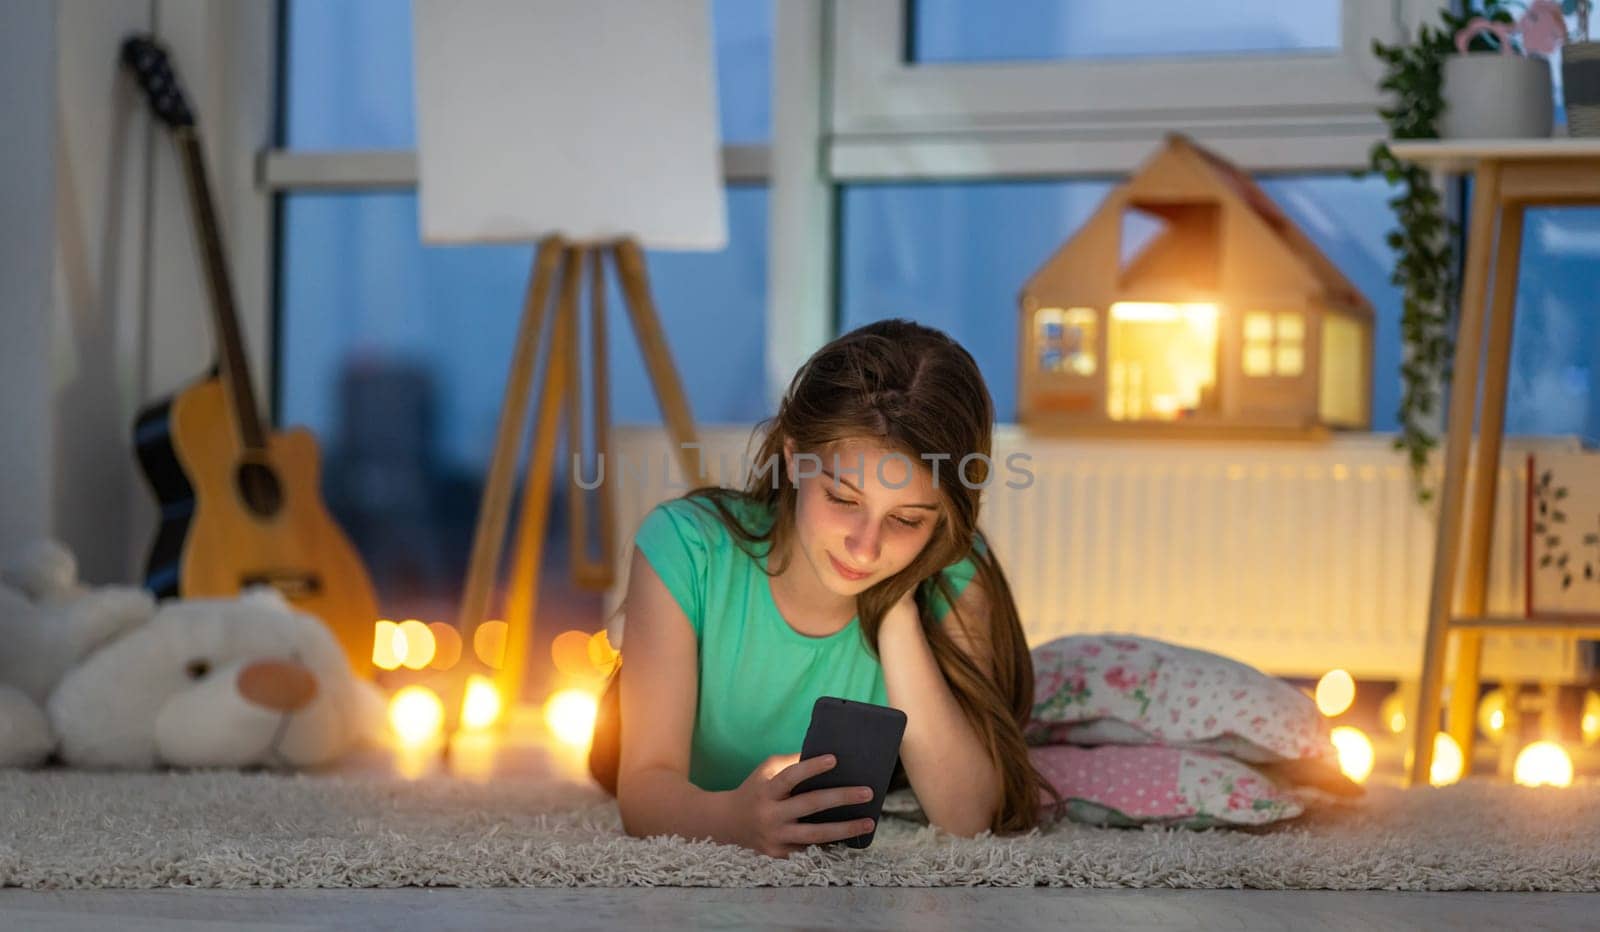 Young girl lying on floor in evening room with smart phone